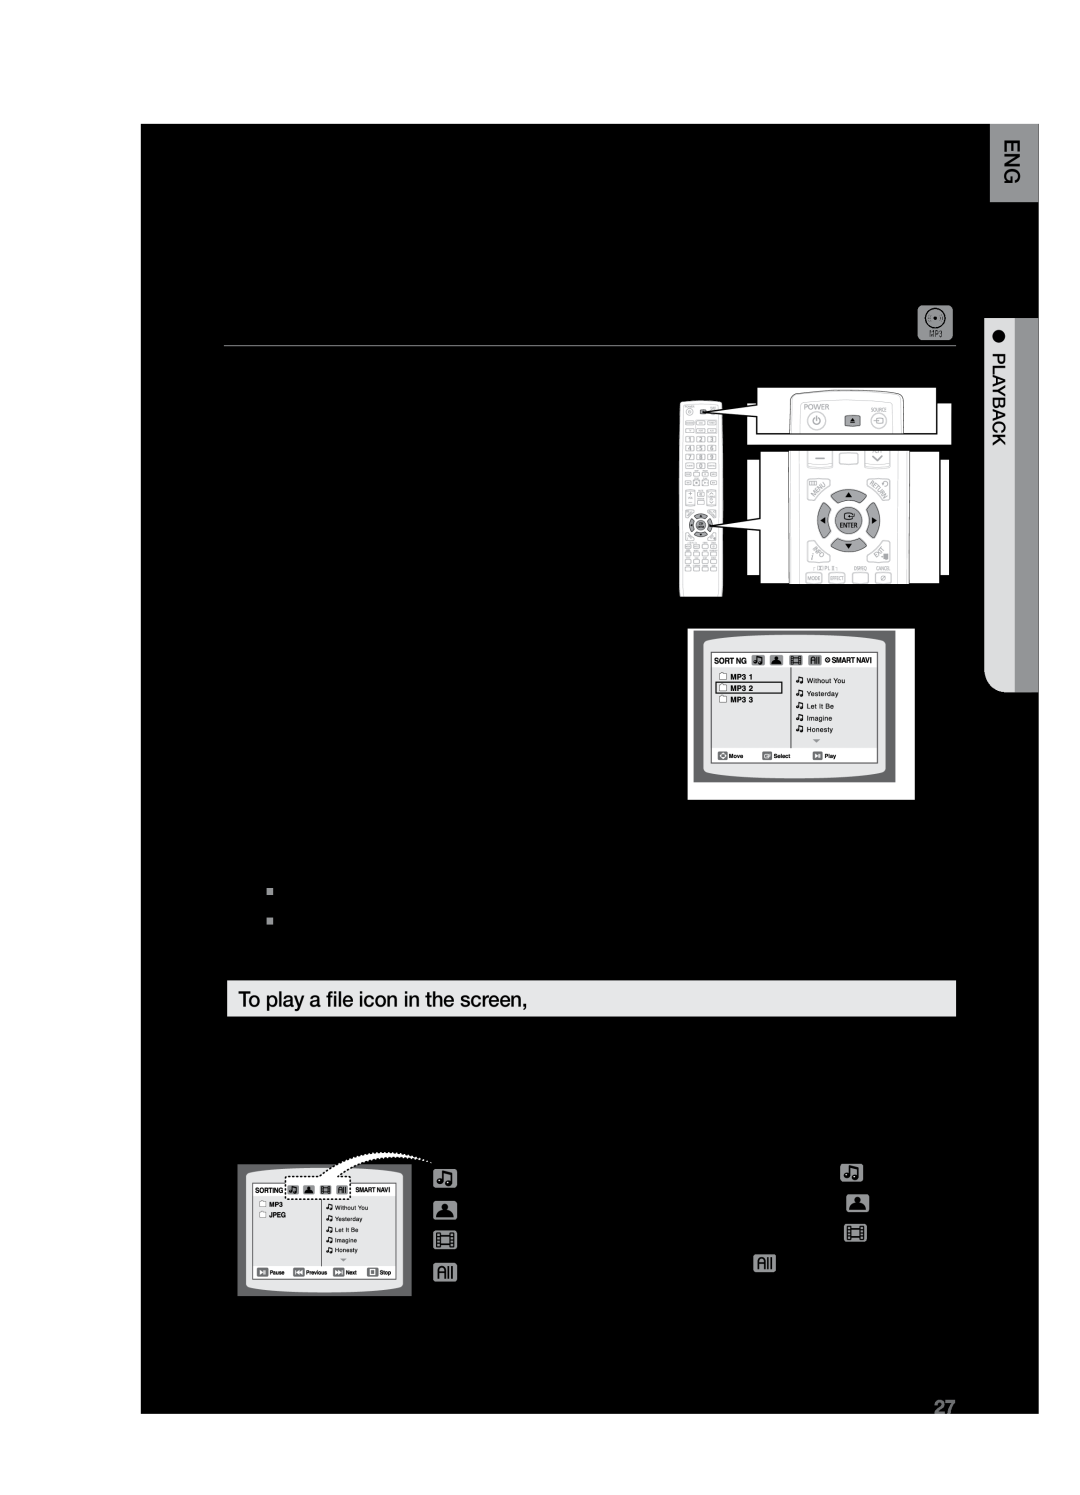 Samsung HT-Z221 user manual MP3/WMA-CDPlayback, To play a file icon in the screen 